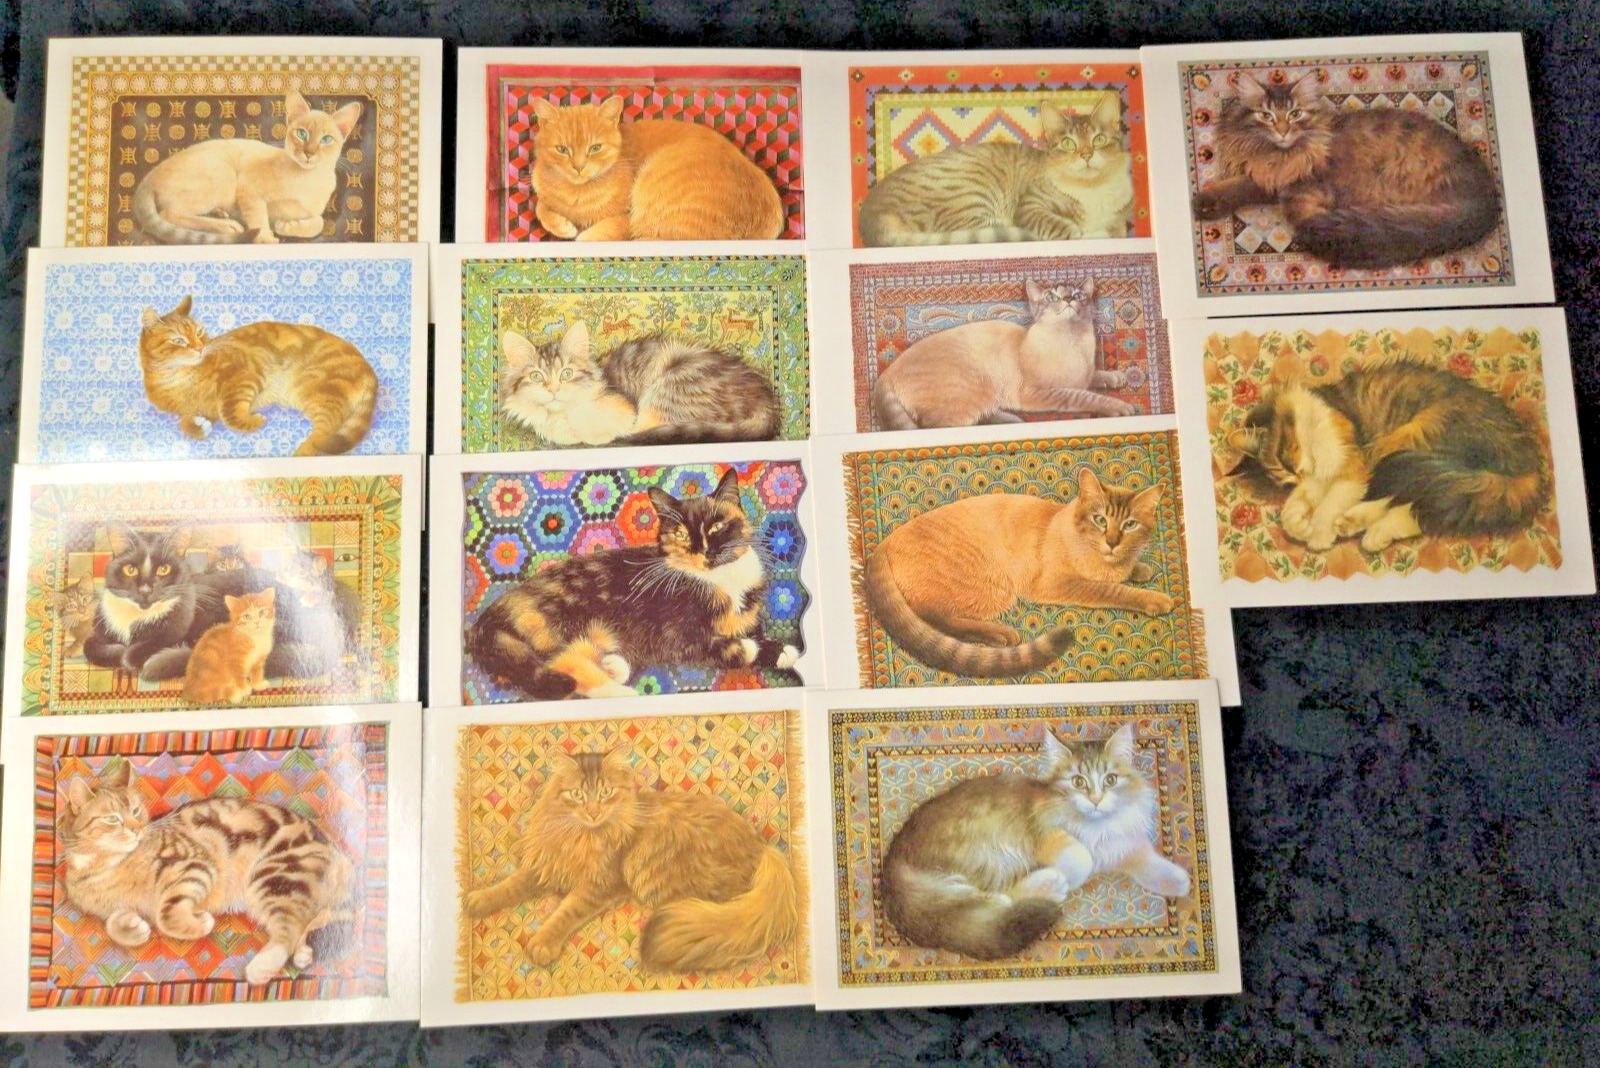 NOS 1989 Lot of 15 Lesley Anne Ivory Cats Kittens Quilts Quilting Postcards Book